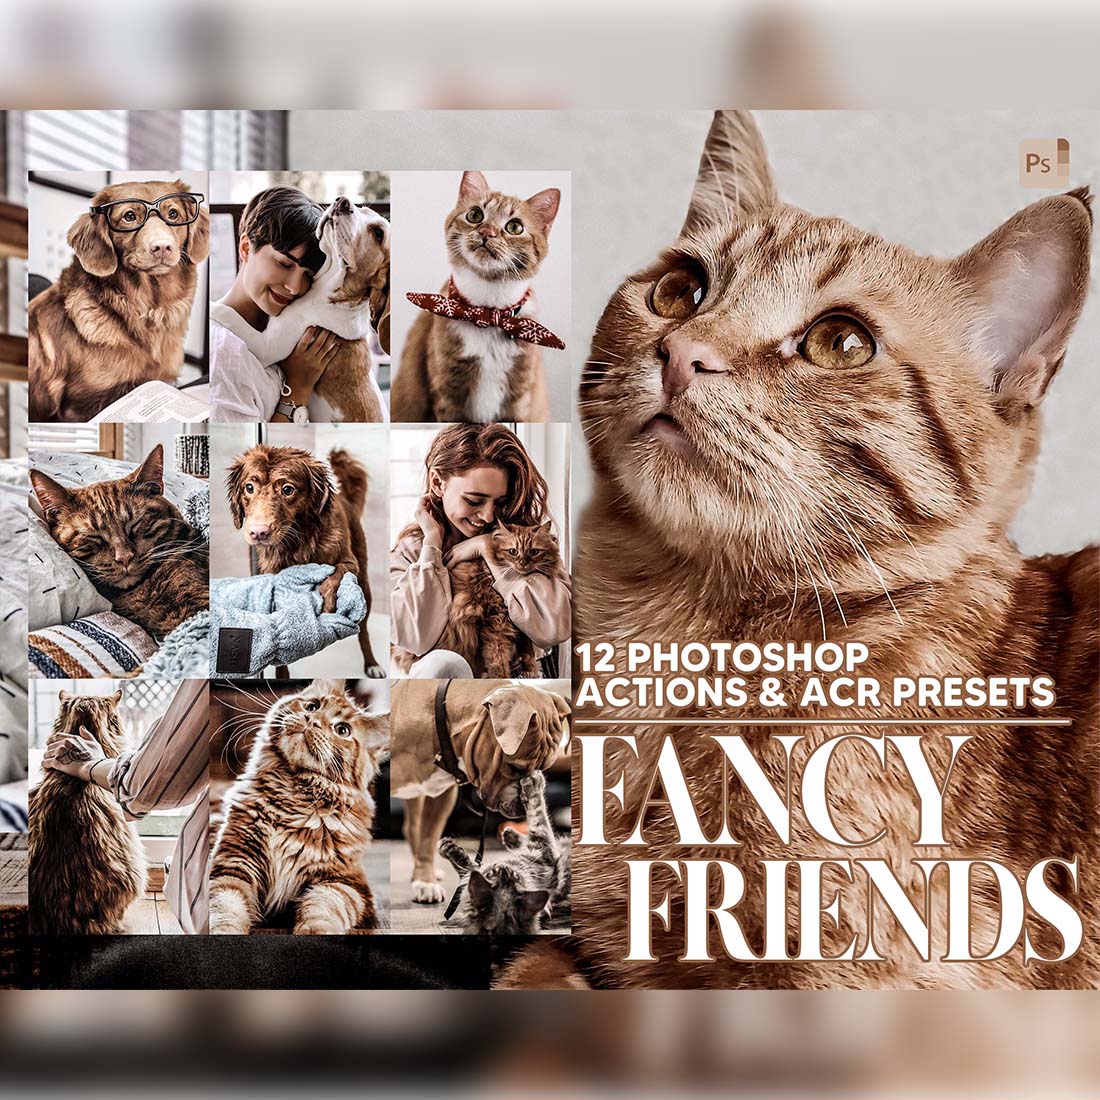 12 Photoshop Actions, Fancy Friends Ps Action, Animal ACR Preset, Doggie Ps Filter, Atn Portrait And Lifestyle Theme For Instagram, Blogger cover image.